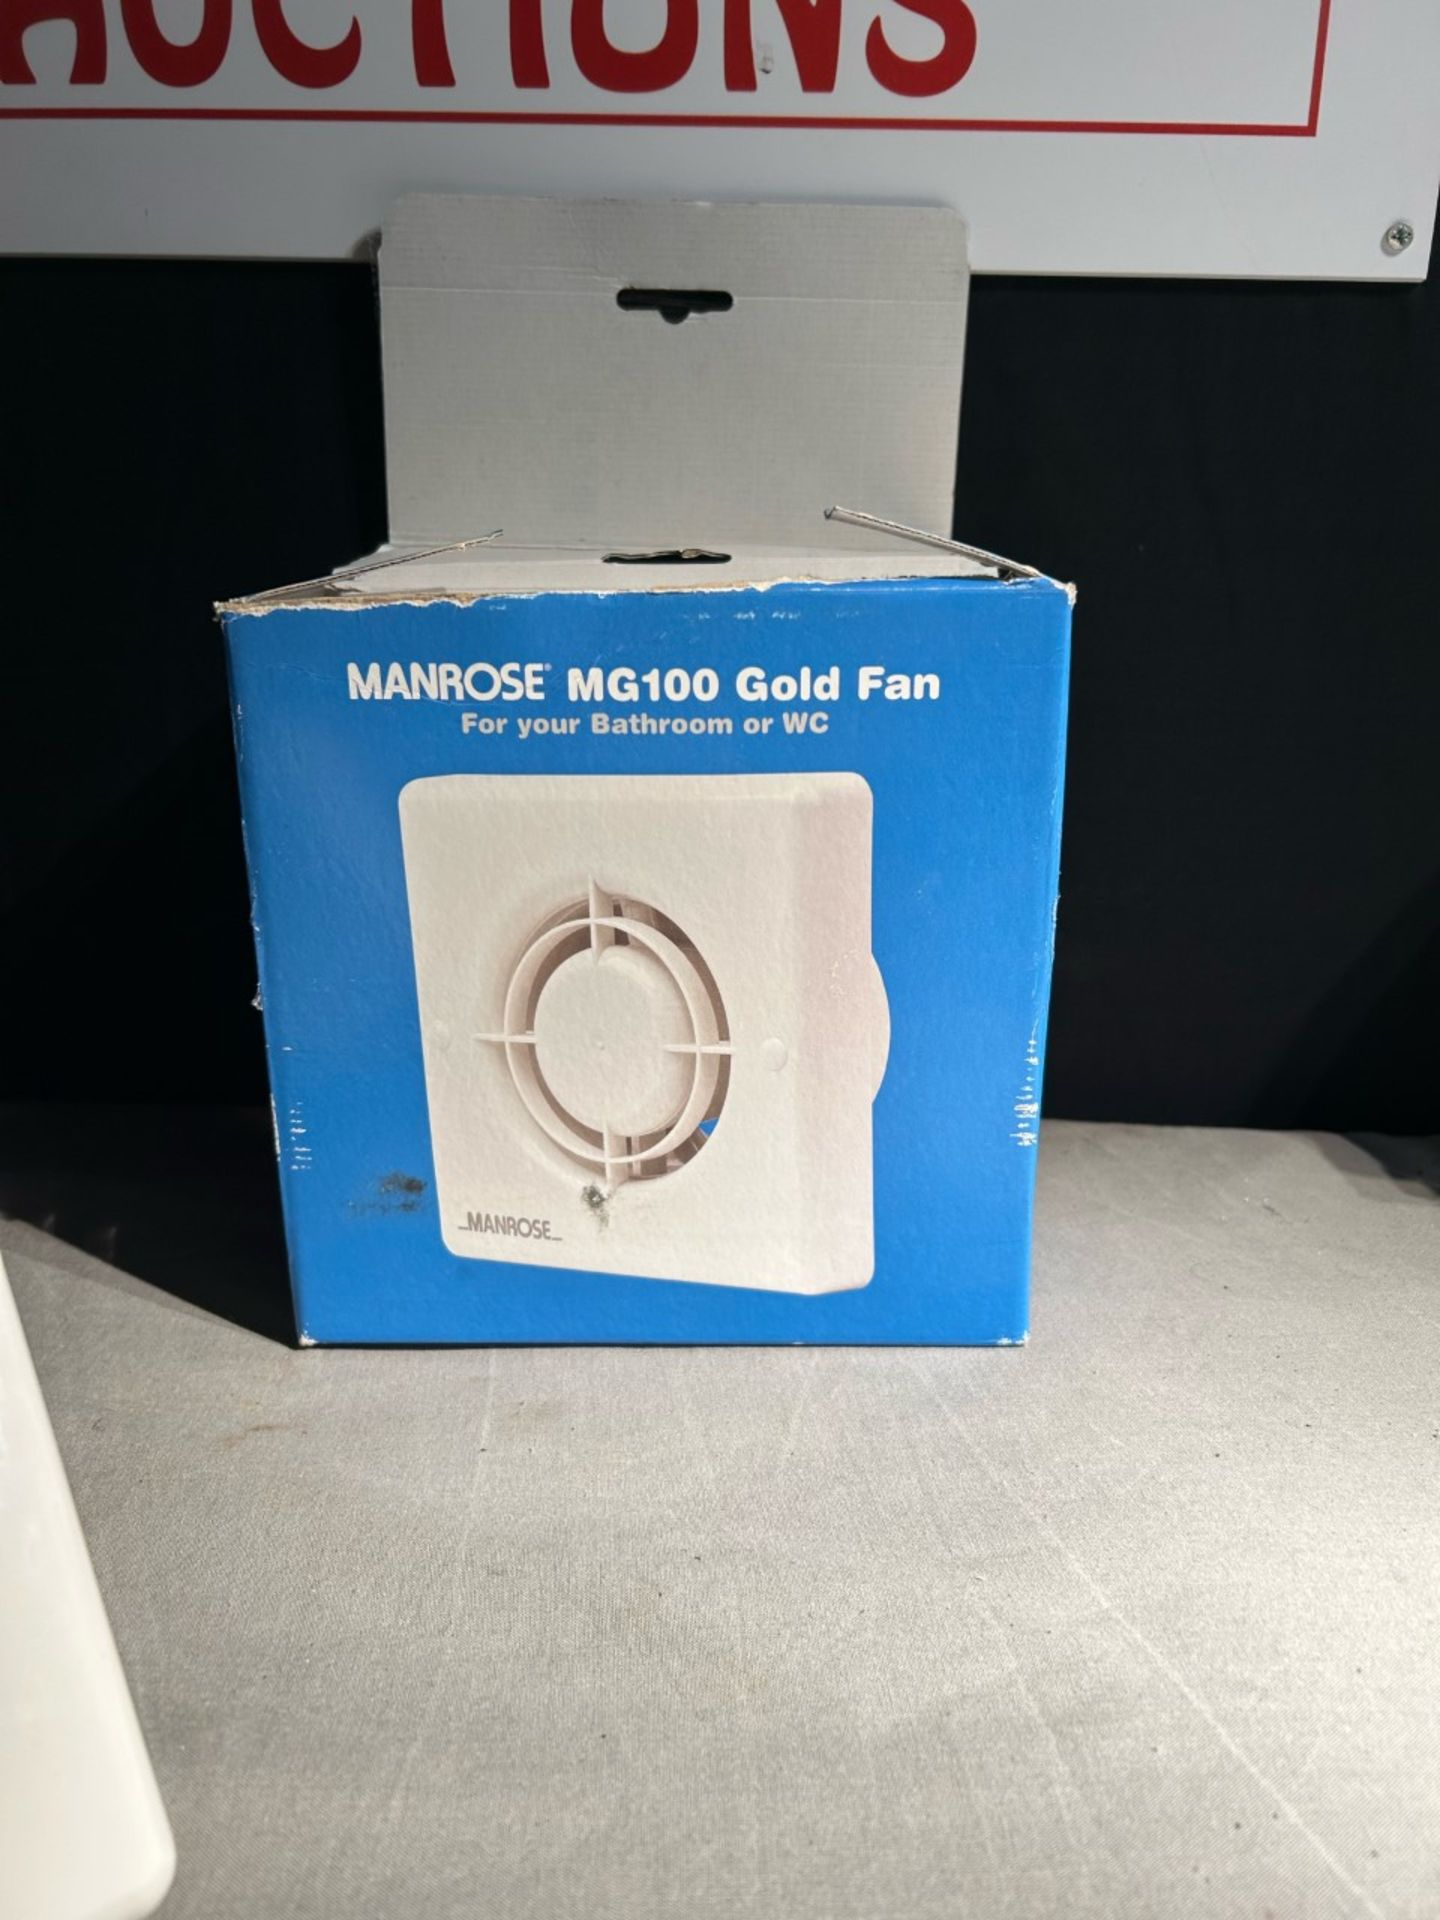 Manrose MG100 gold fan. New in box. Working order unknown - Image 2 of 2